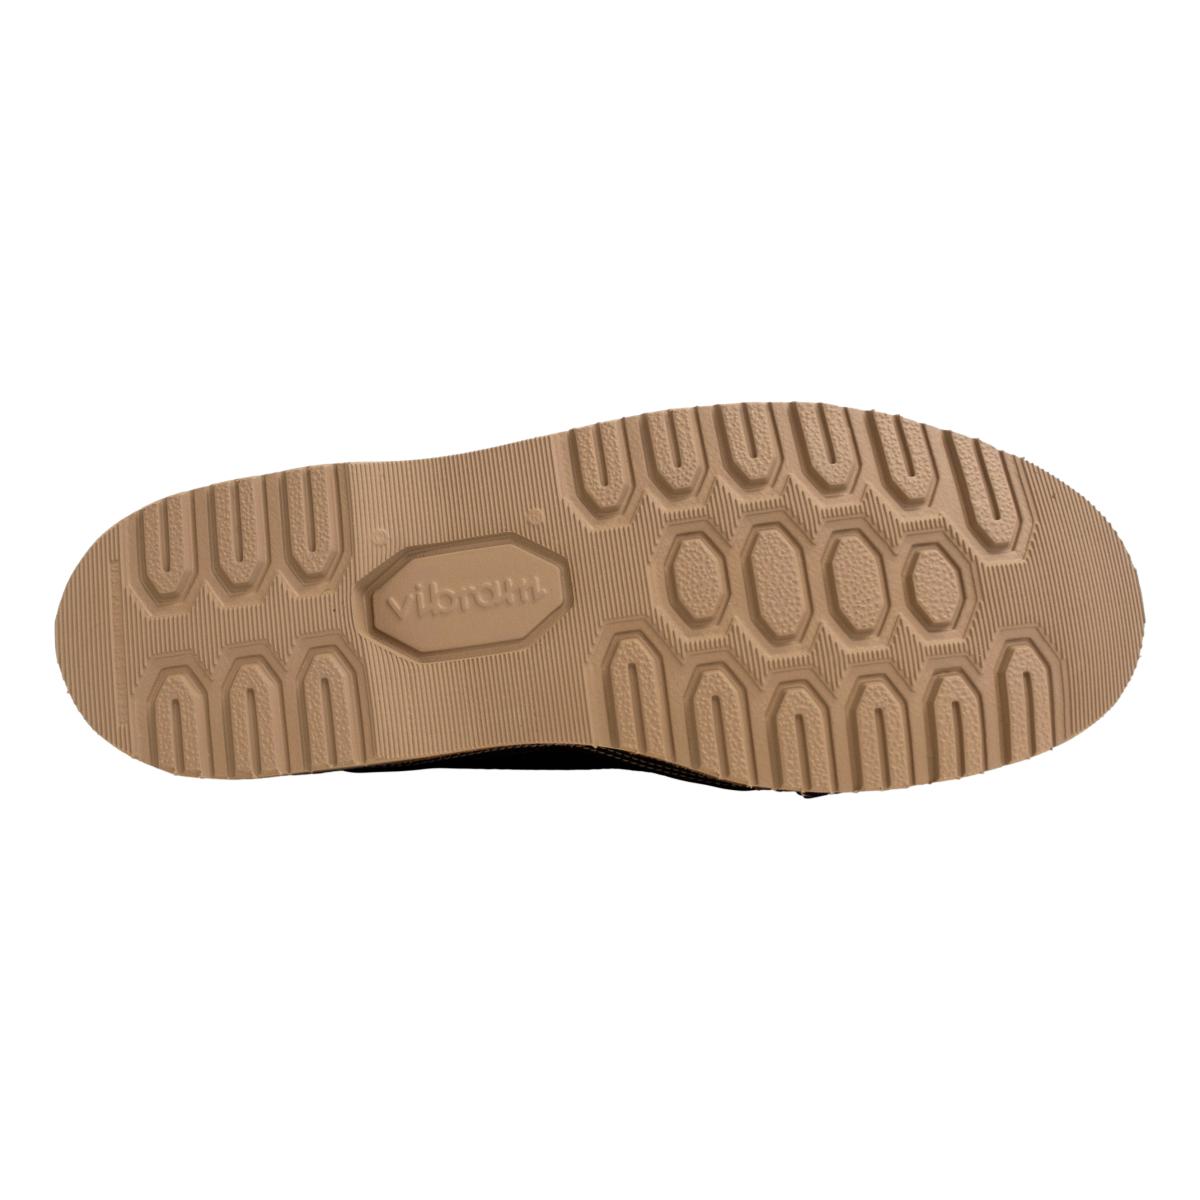 Scout Boot Chocolate Grizzly - Shoes/Boots